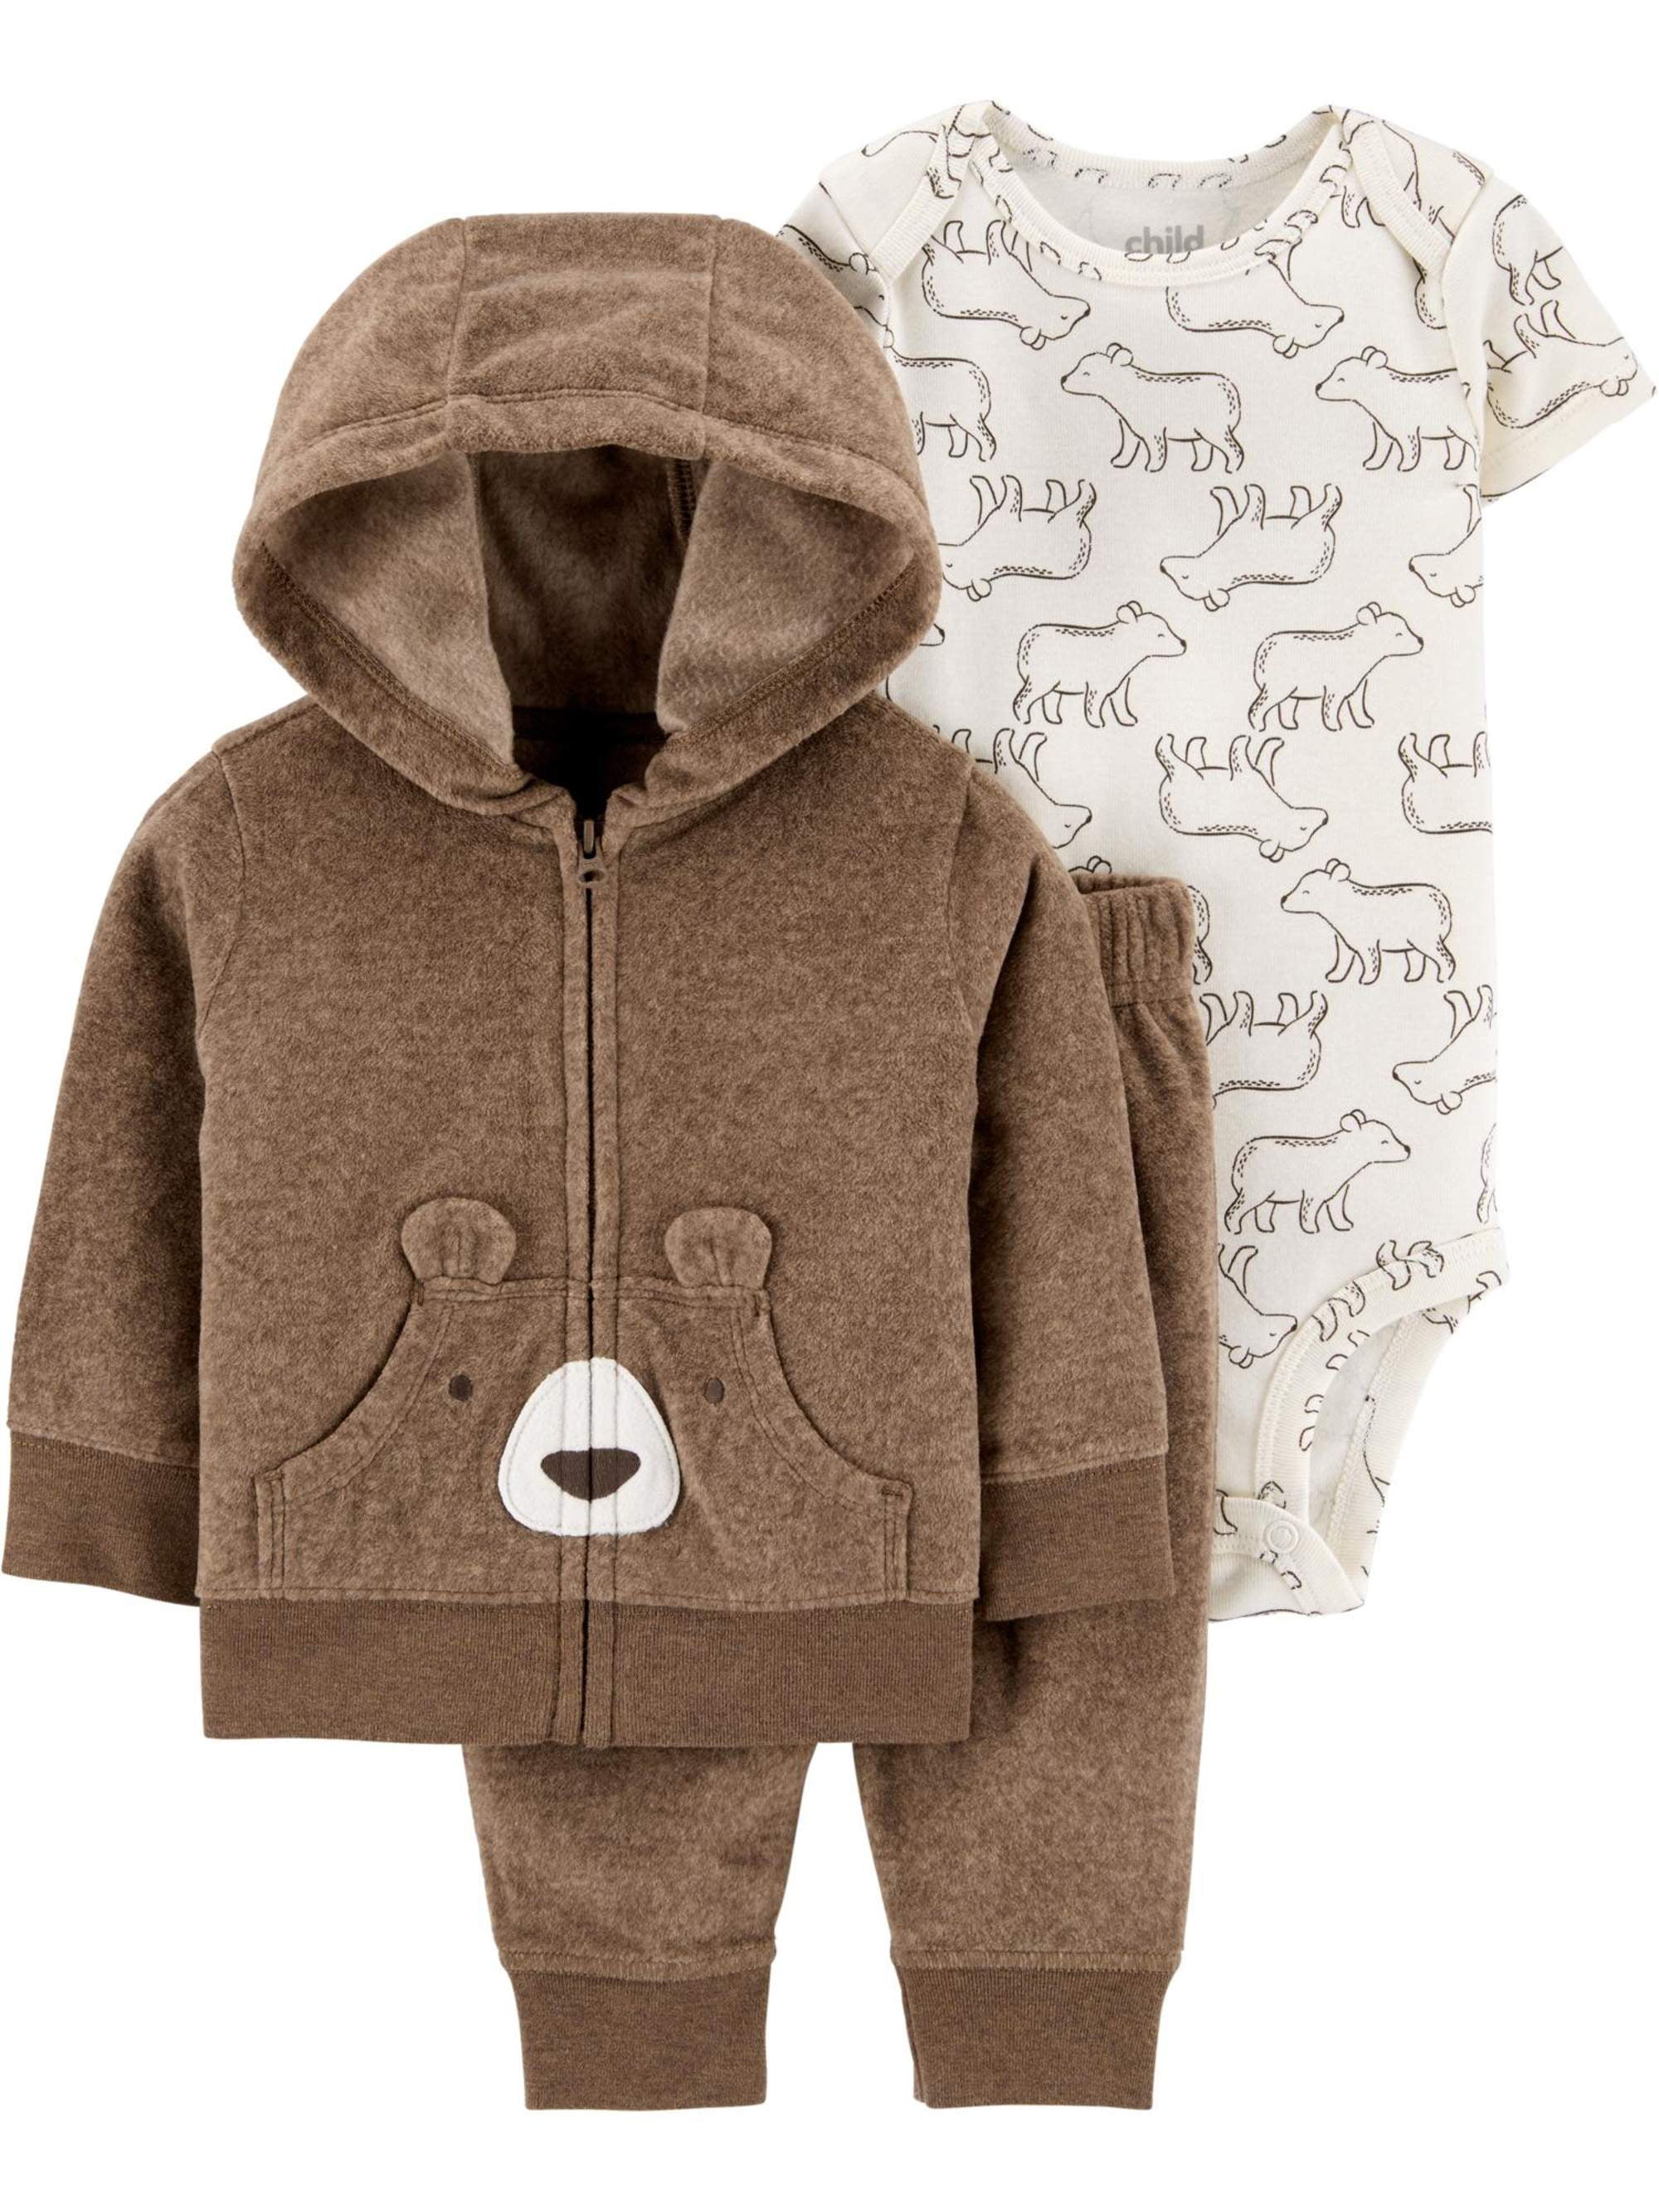 BABY BOYS 3 PIECE OUTFIT WITH HOODED JACKET